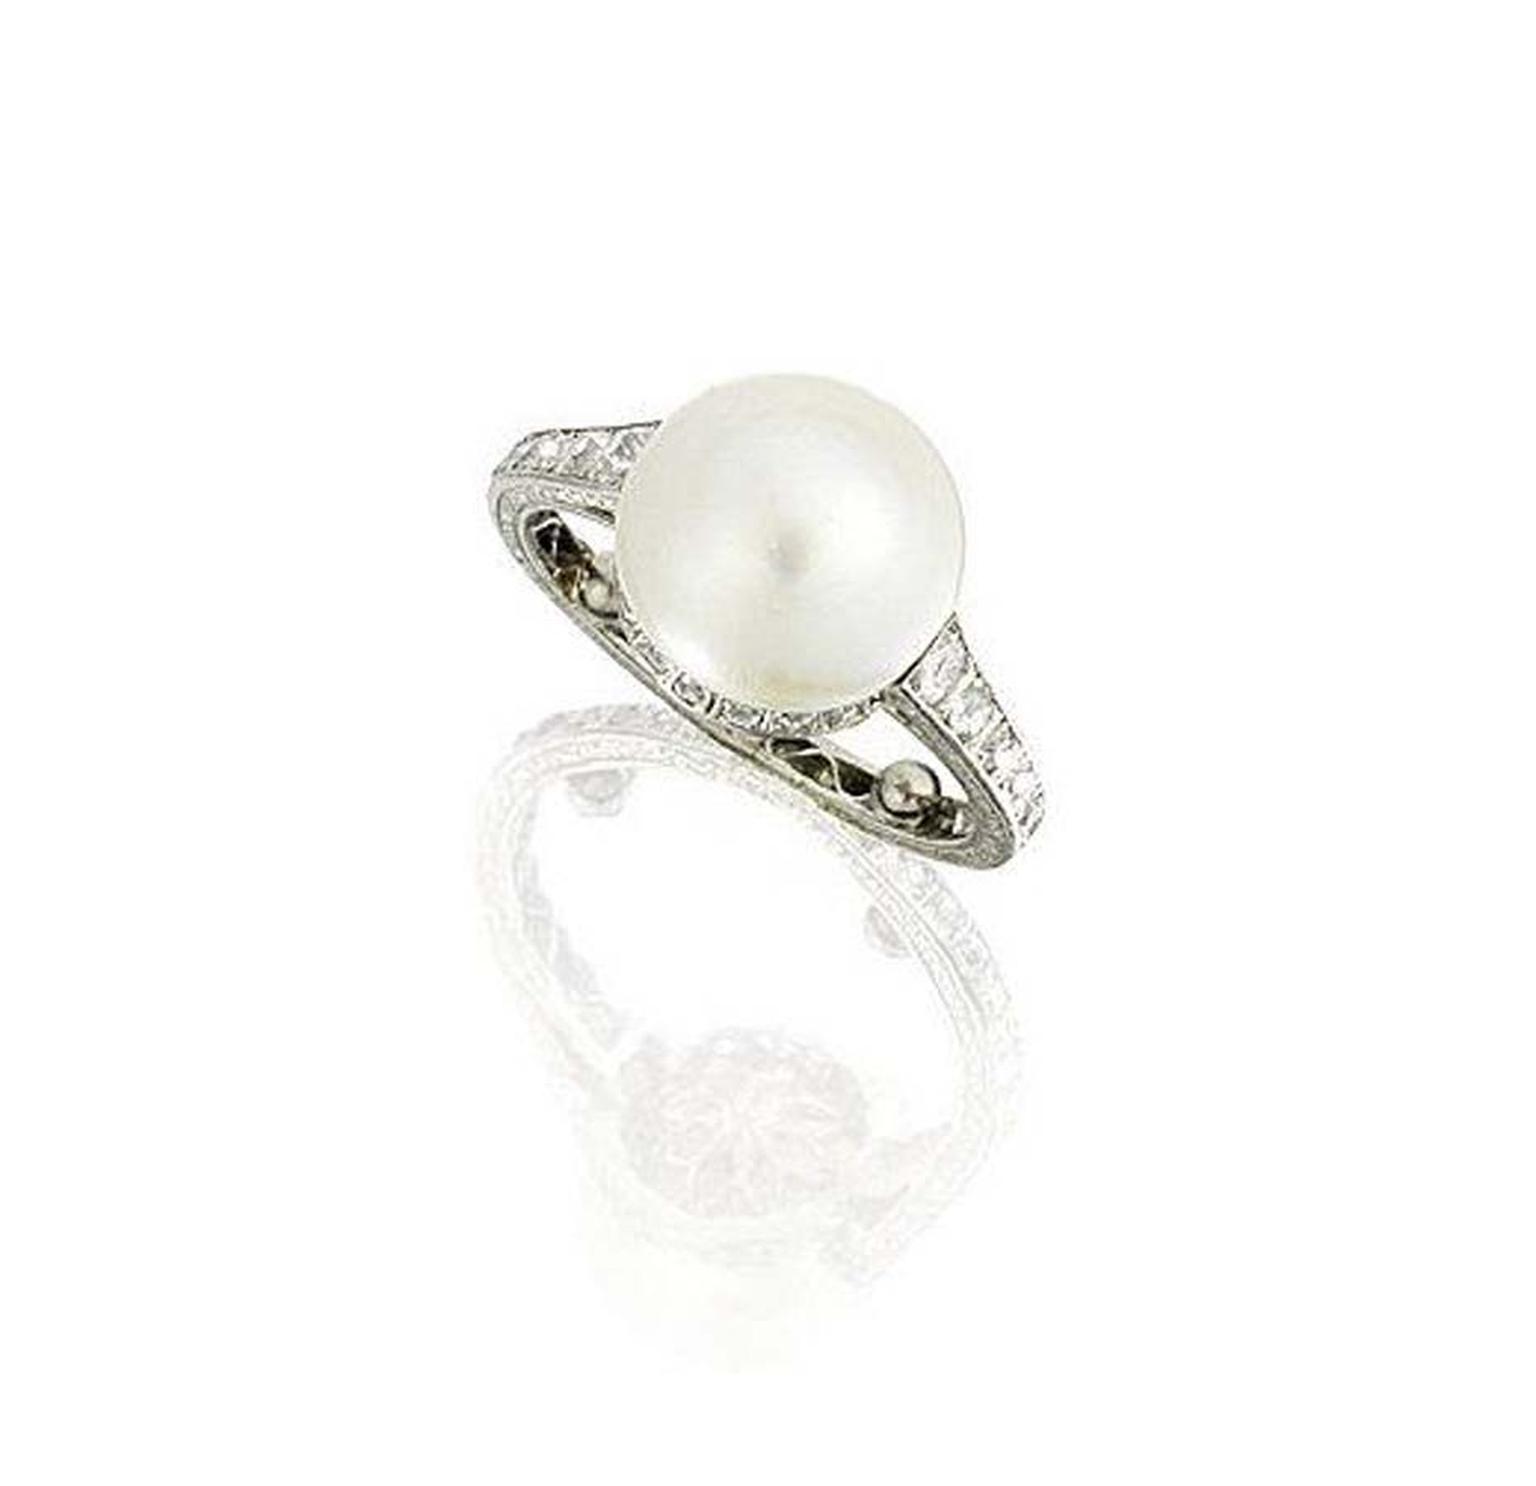 A 1930s diamond and natural pearl ring on an engraved band which sold for £47,500 at Bonhams Fine Jewellery sale.